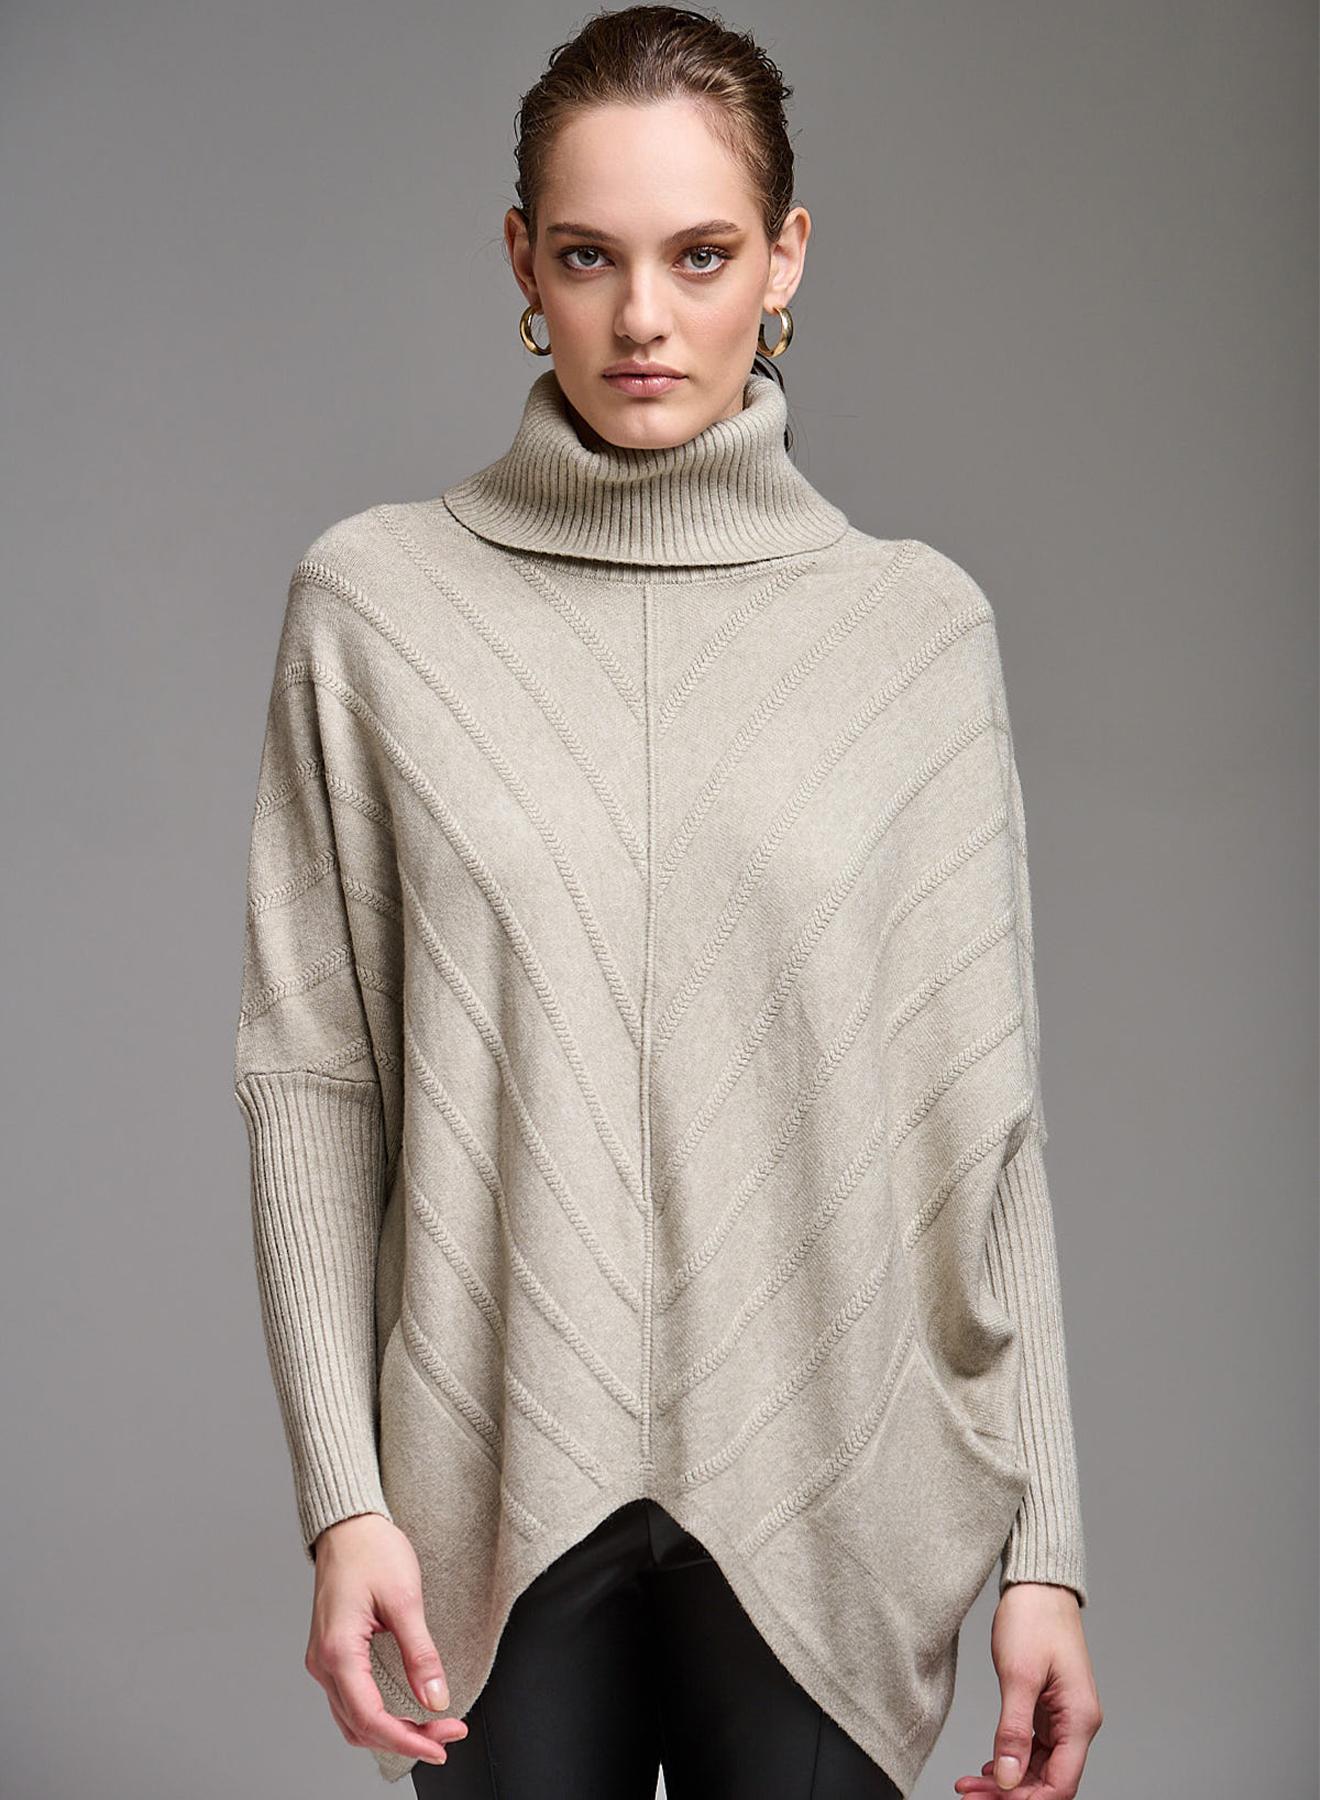 Oversized turtleneck sweater with textured details and pockets - 2